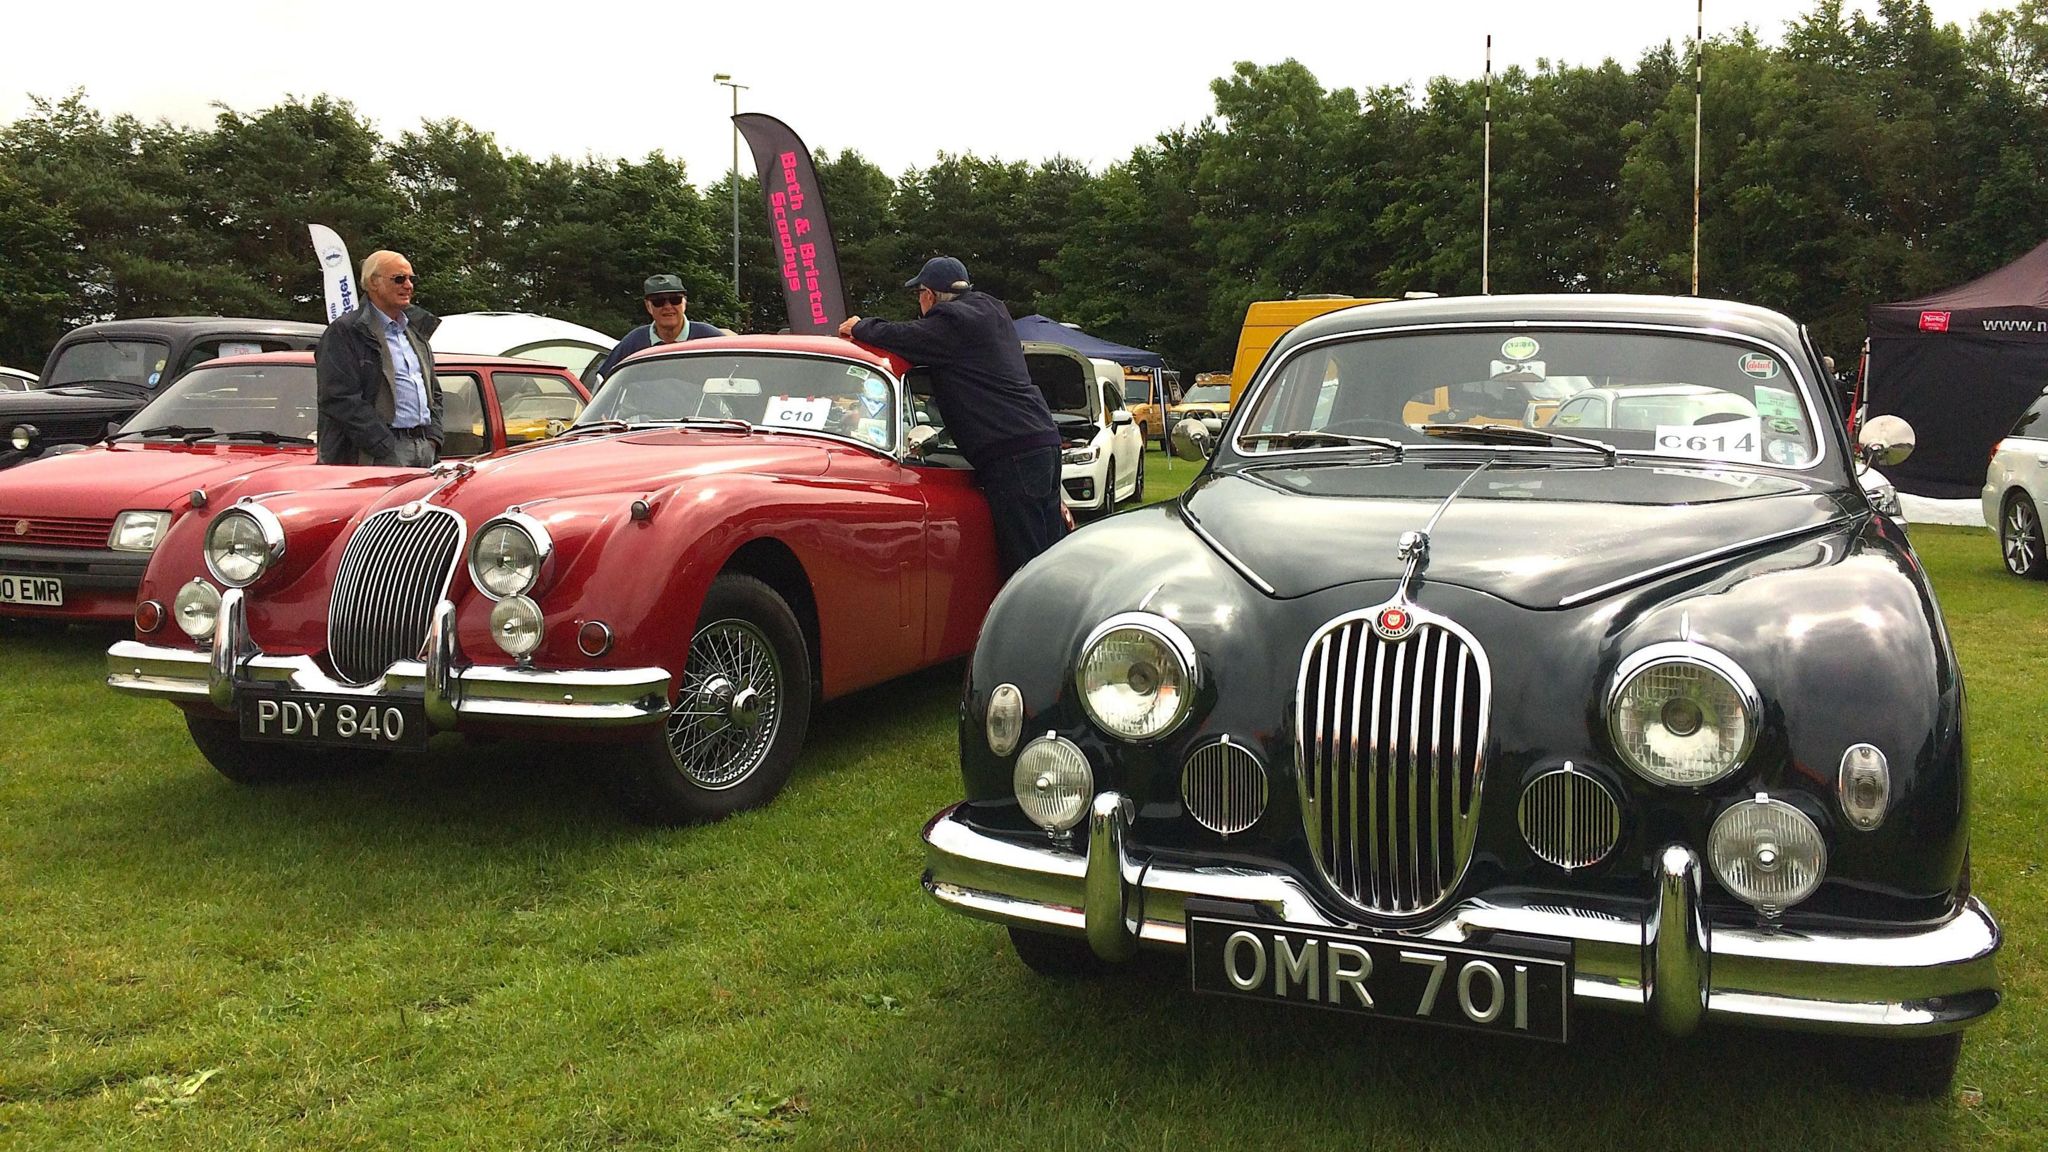 Image of vintage Jaguars at the Rotary Festival of Motoring